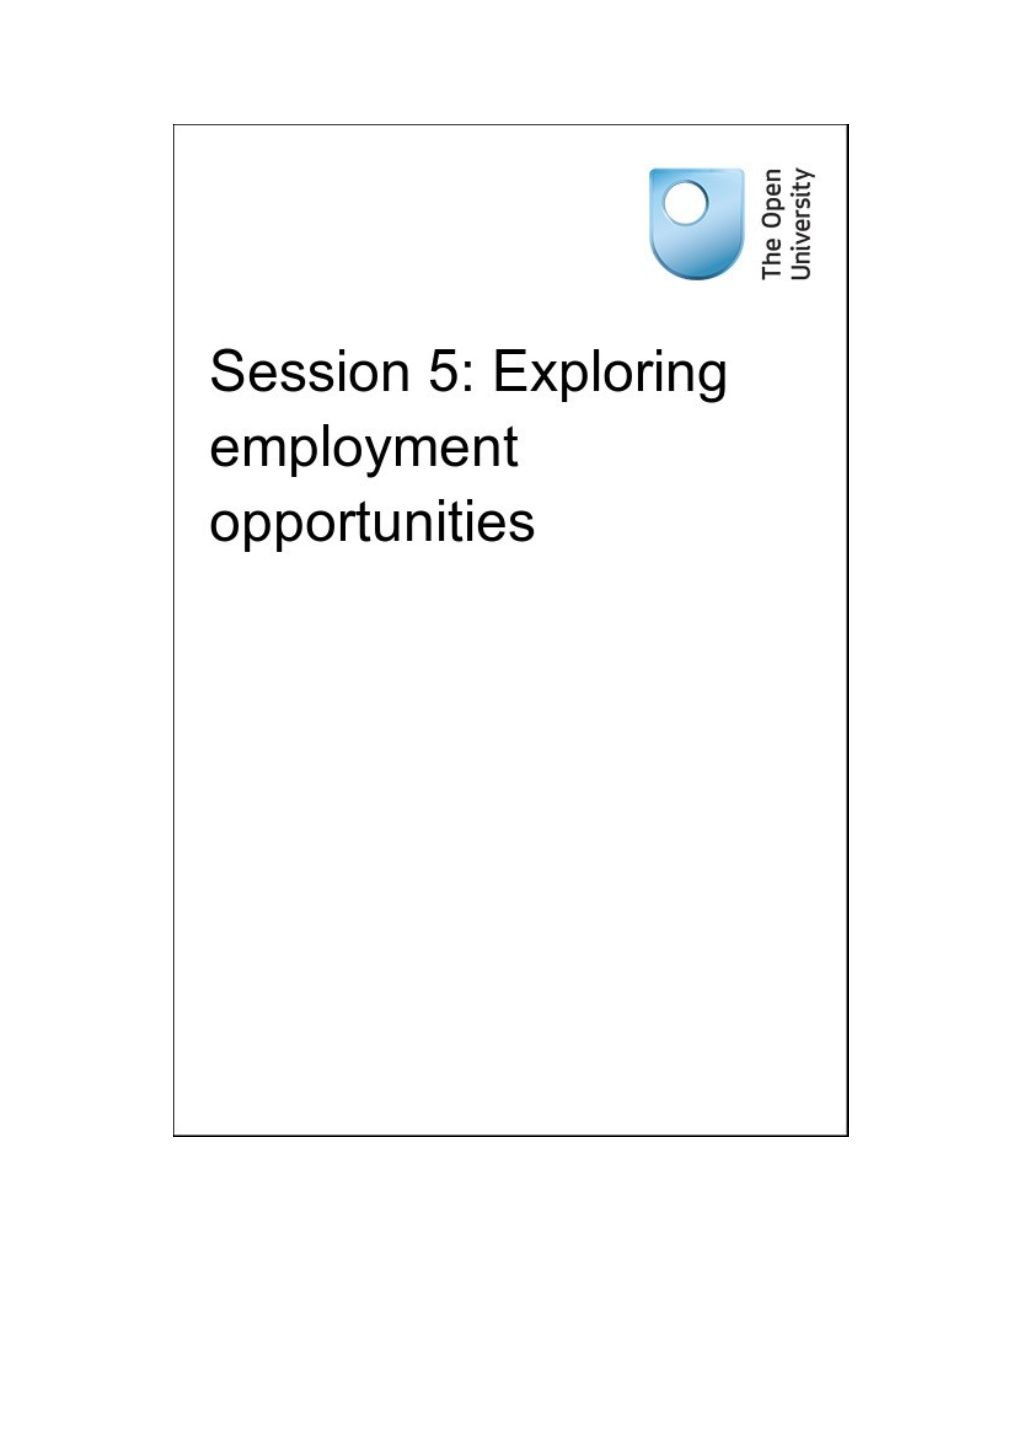 Session 5: Exploring Employment Opportunities